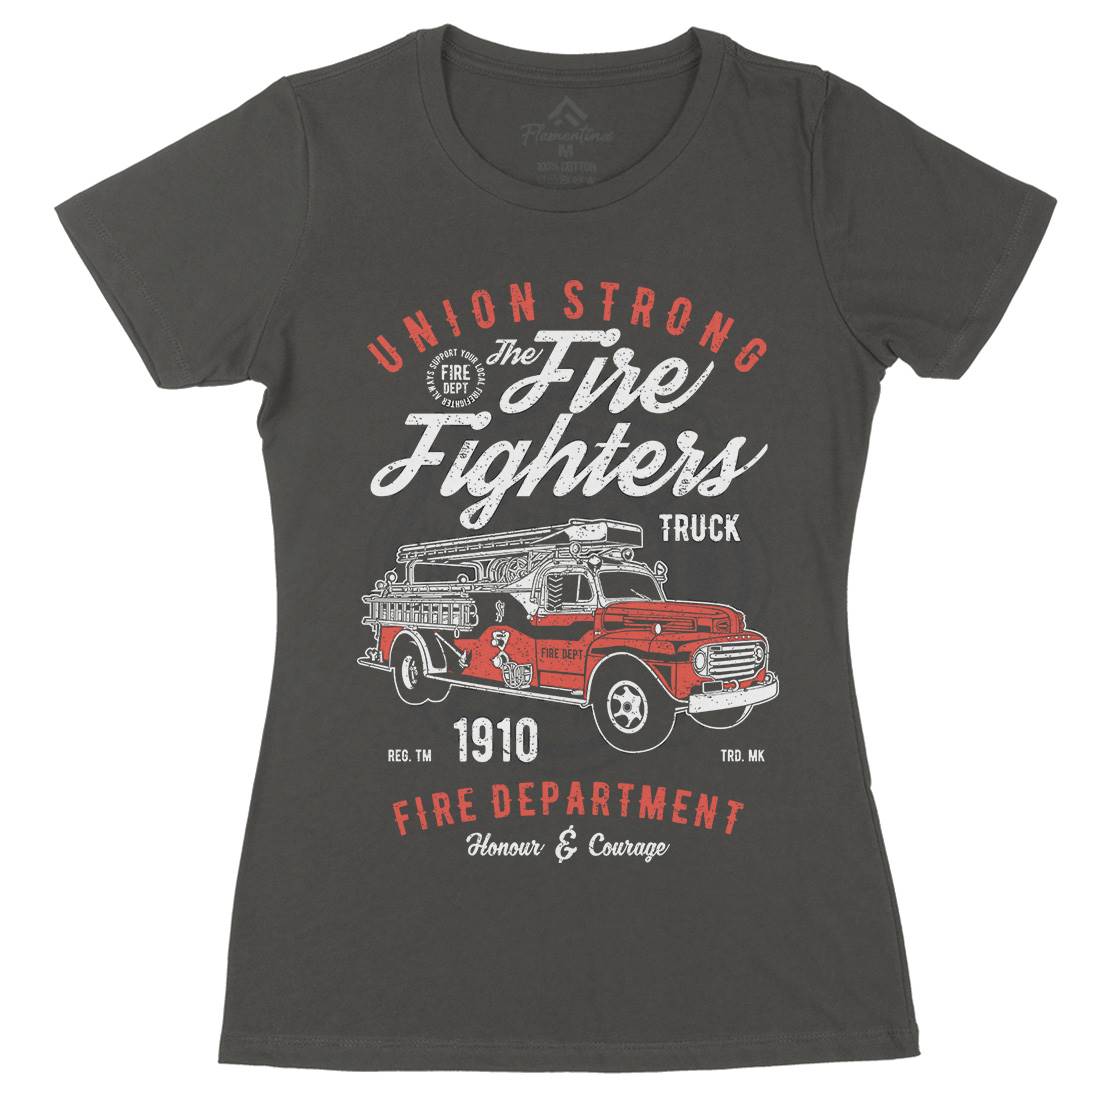 Union Strong Womens Organic Crew Neck T-Shirt Firefighters A781